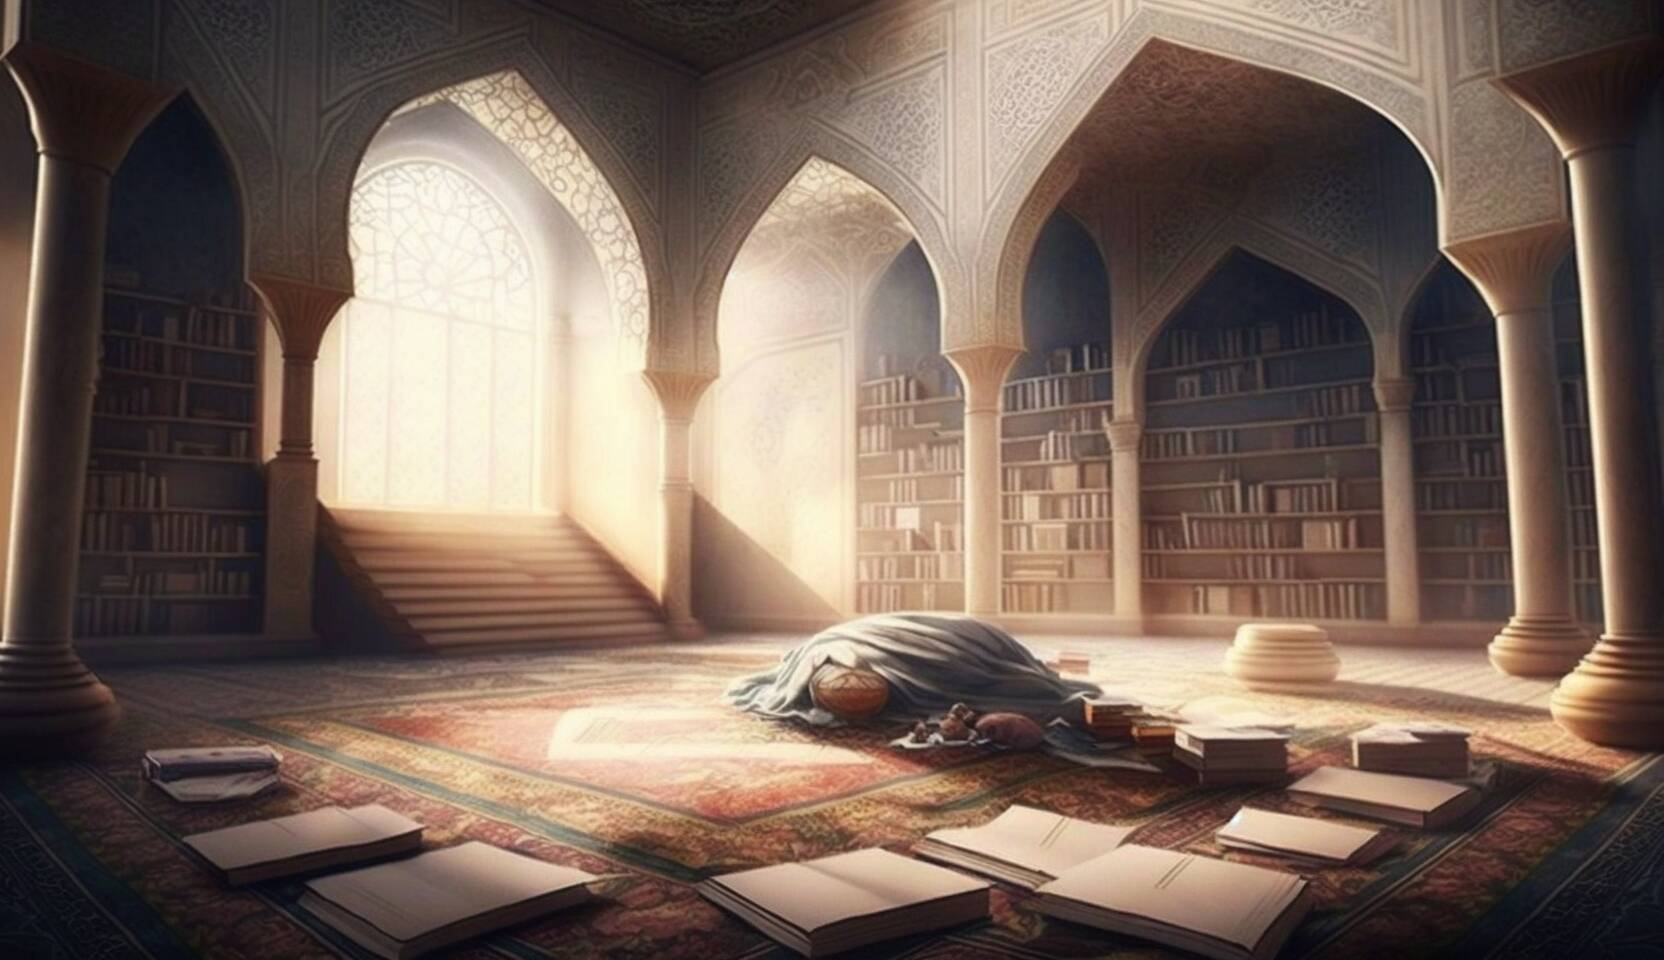 10 Hifz Tips from People Who Have Memorized the Quran